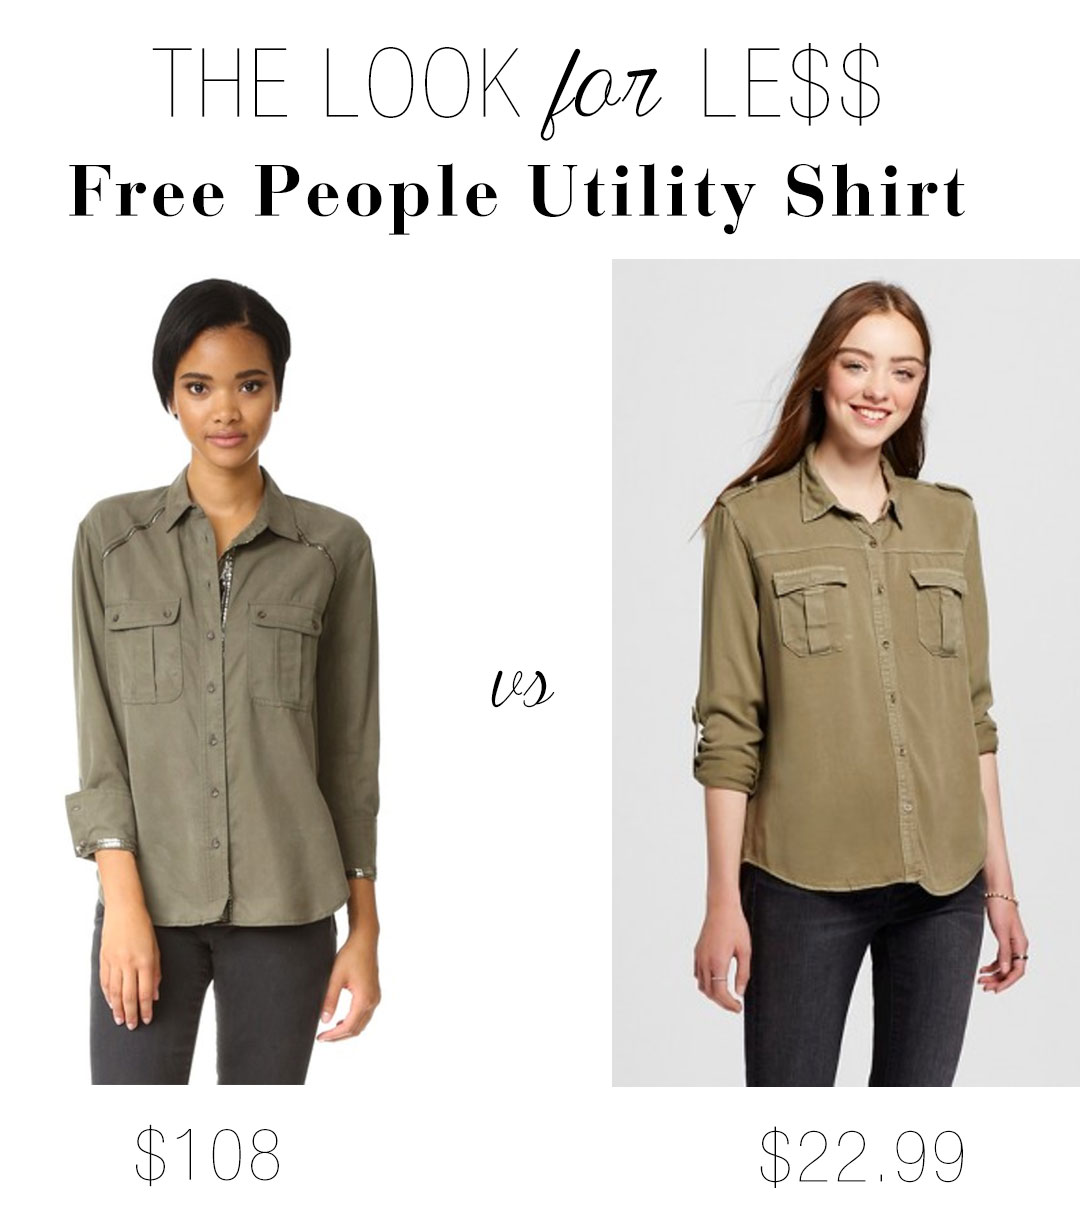 Check out this Free People look for less.